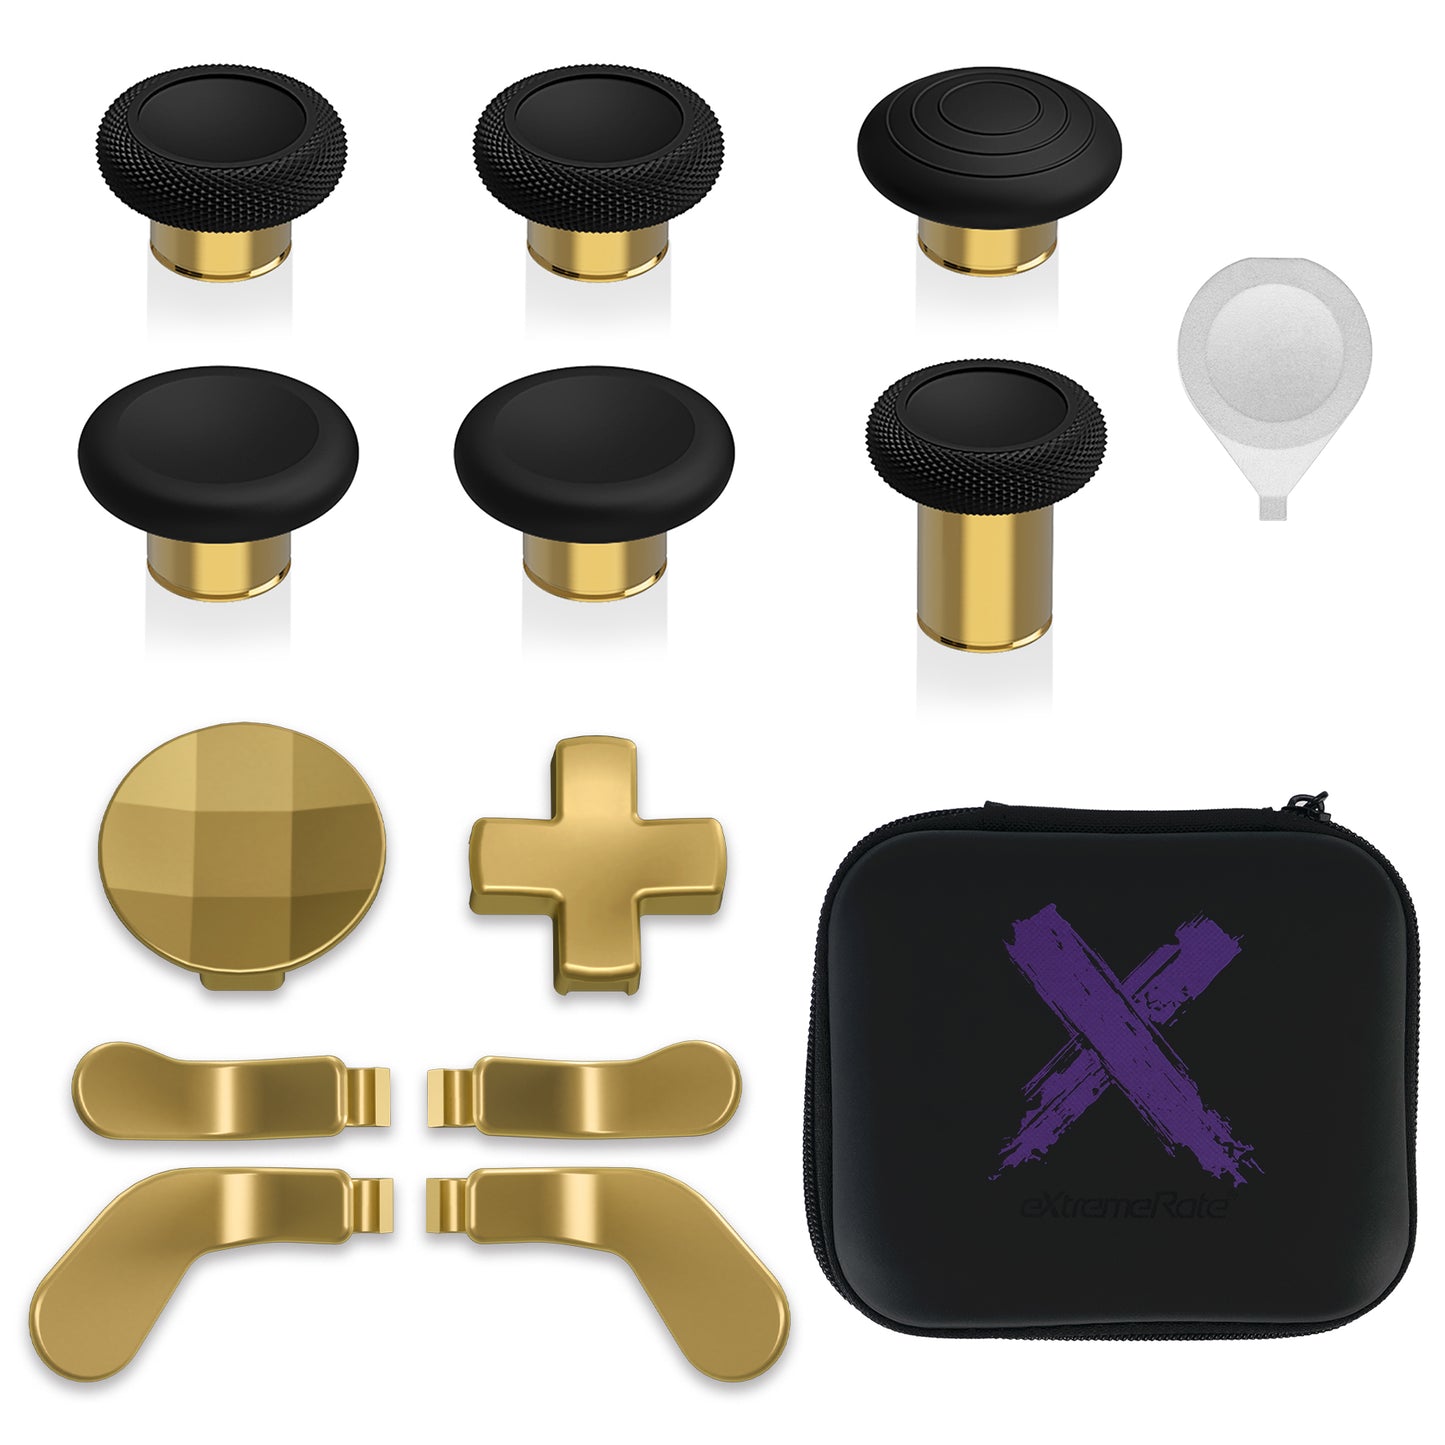 eXtremeRate 13 in 1 Component Pack Kit Replacement Metal Thumbsticks & D-Pads & Paddles for Xbox Elite Series 2 & Elite 2 Core Controller (Model 1797) - Metallic Hero Gold eXtremeRate